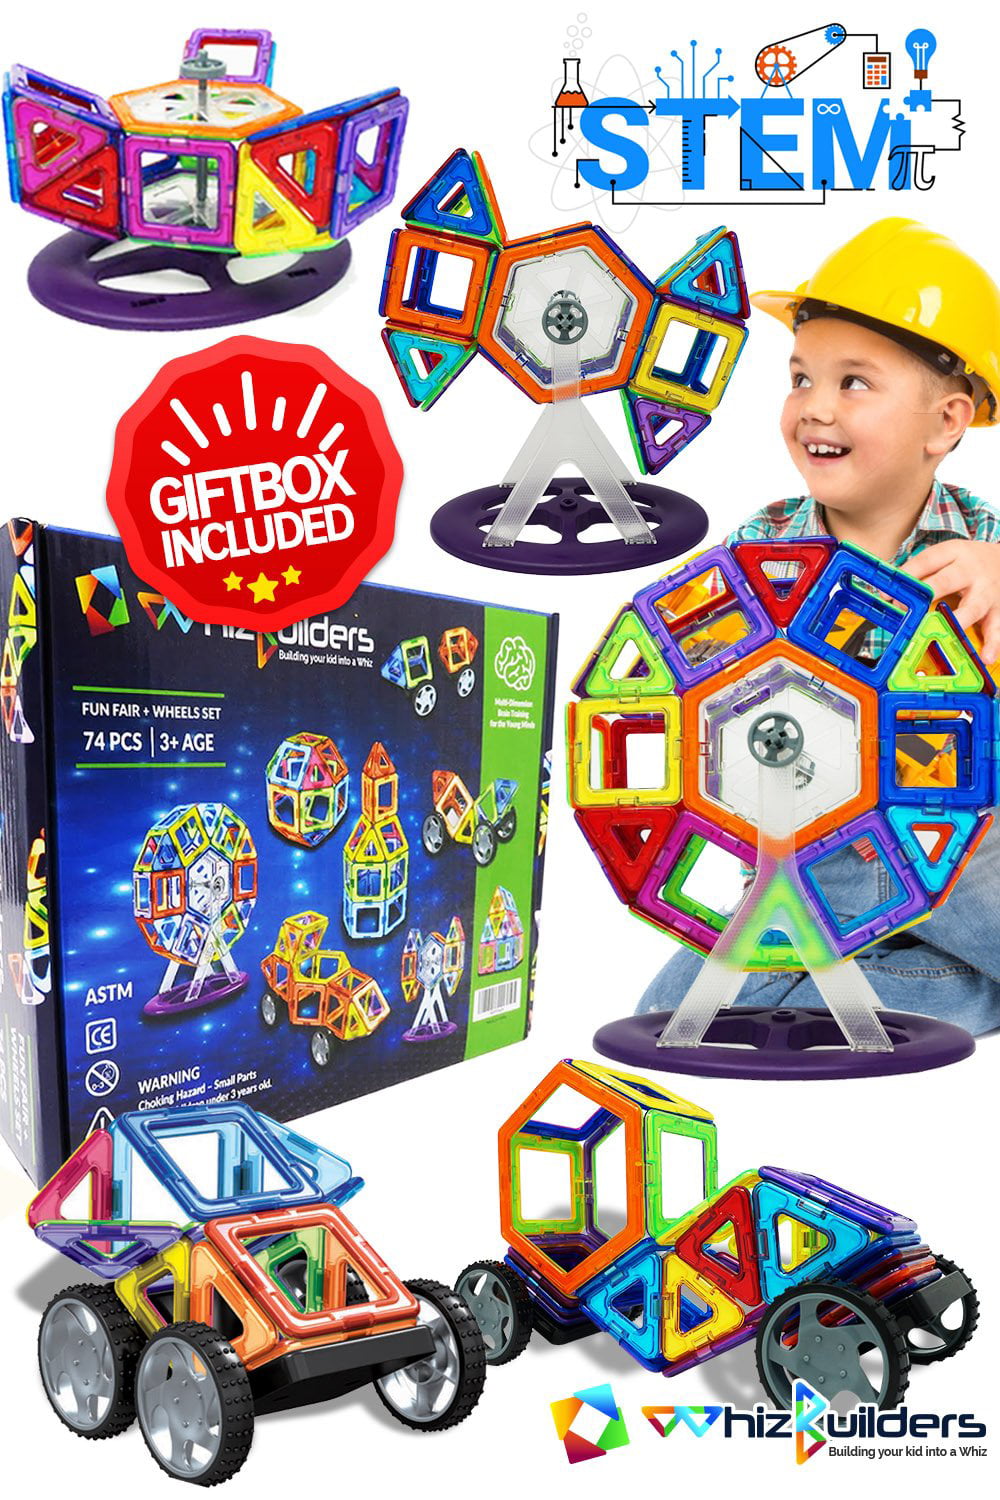 Magnetic Building Blocks Toys Set - Tiles Block Toy Kit for Kids - STEM Educational Construction Stacking Shapes - Ferris Wheel and Vehicle Set - 74 Pieces